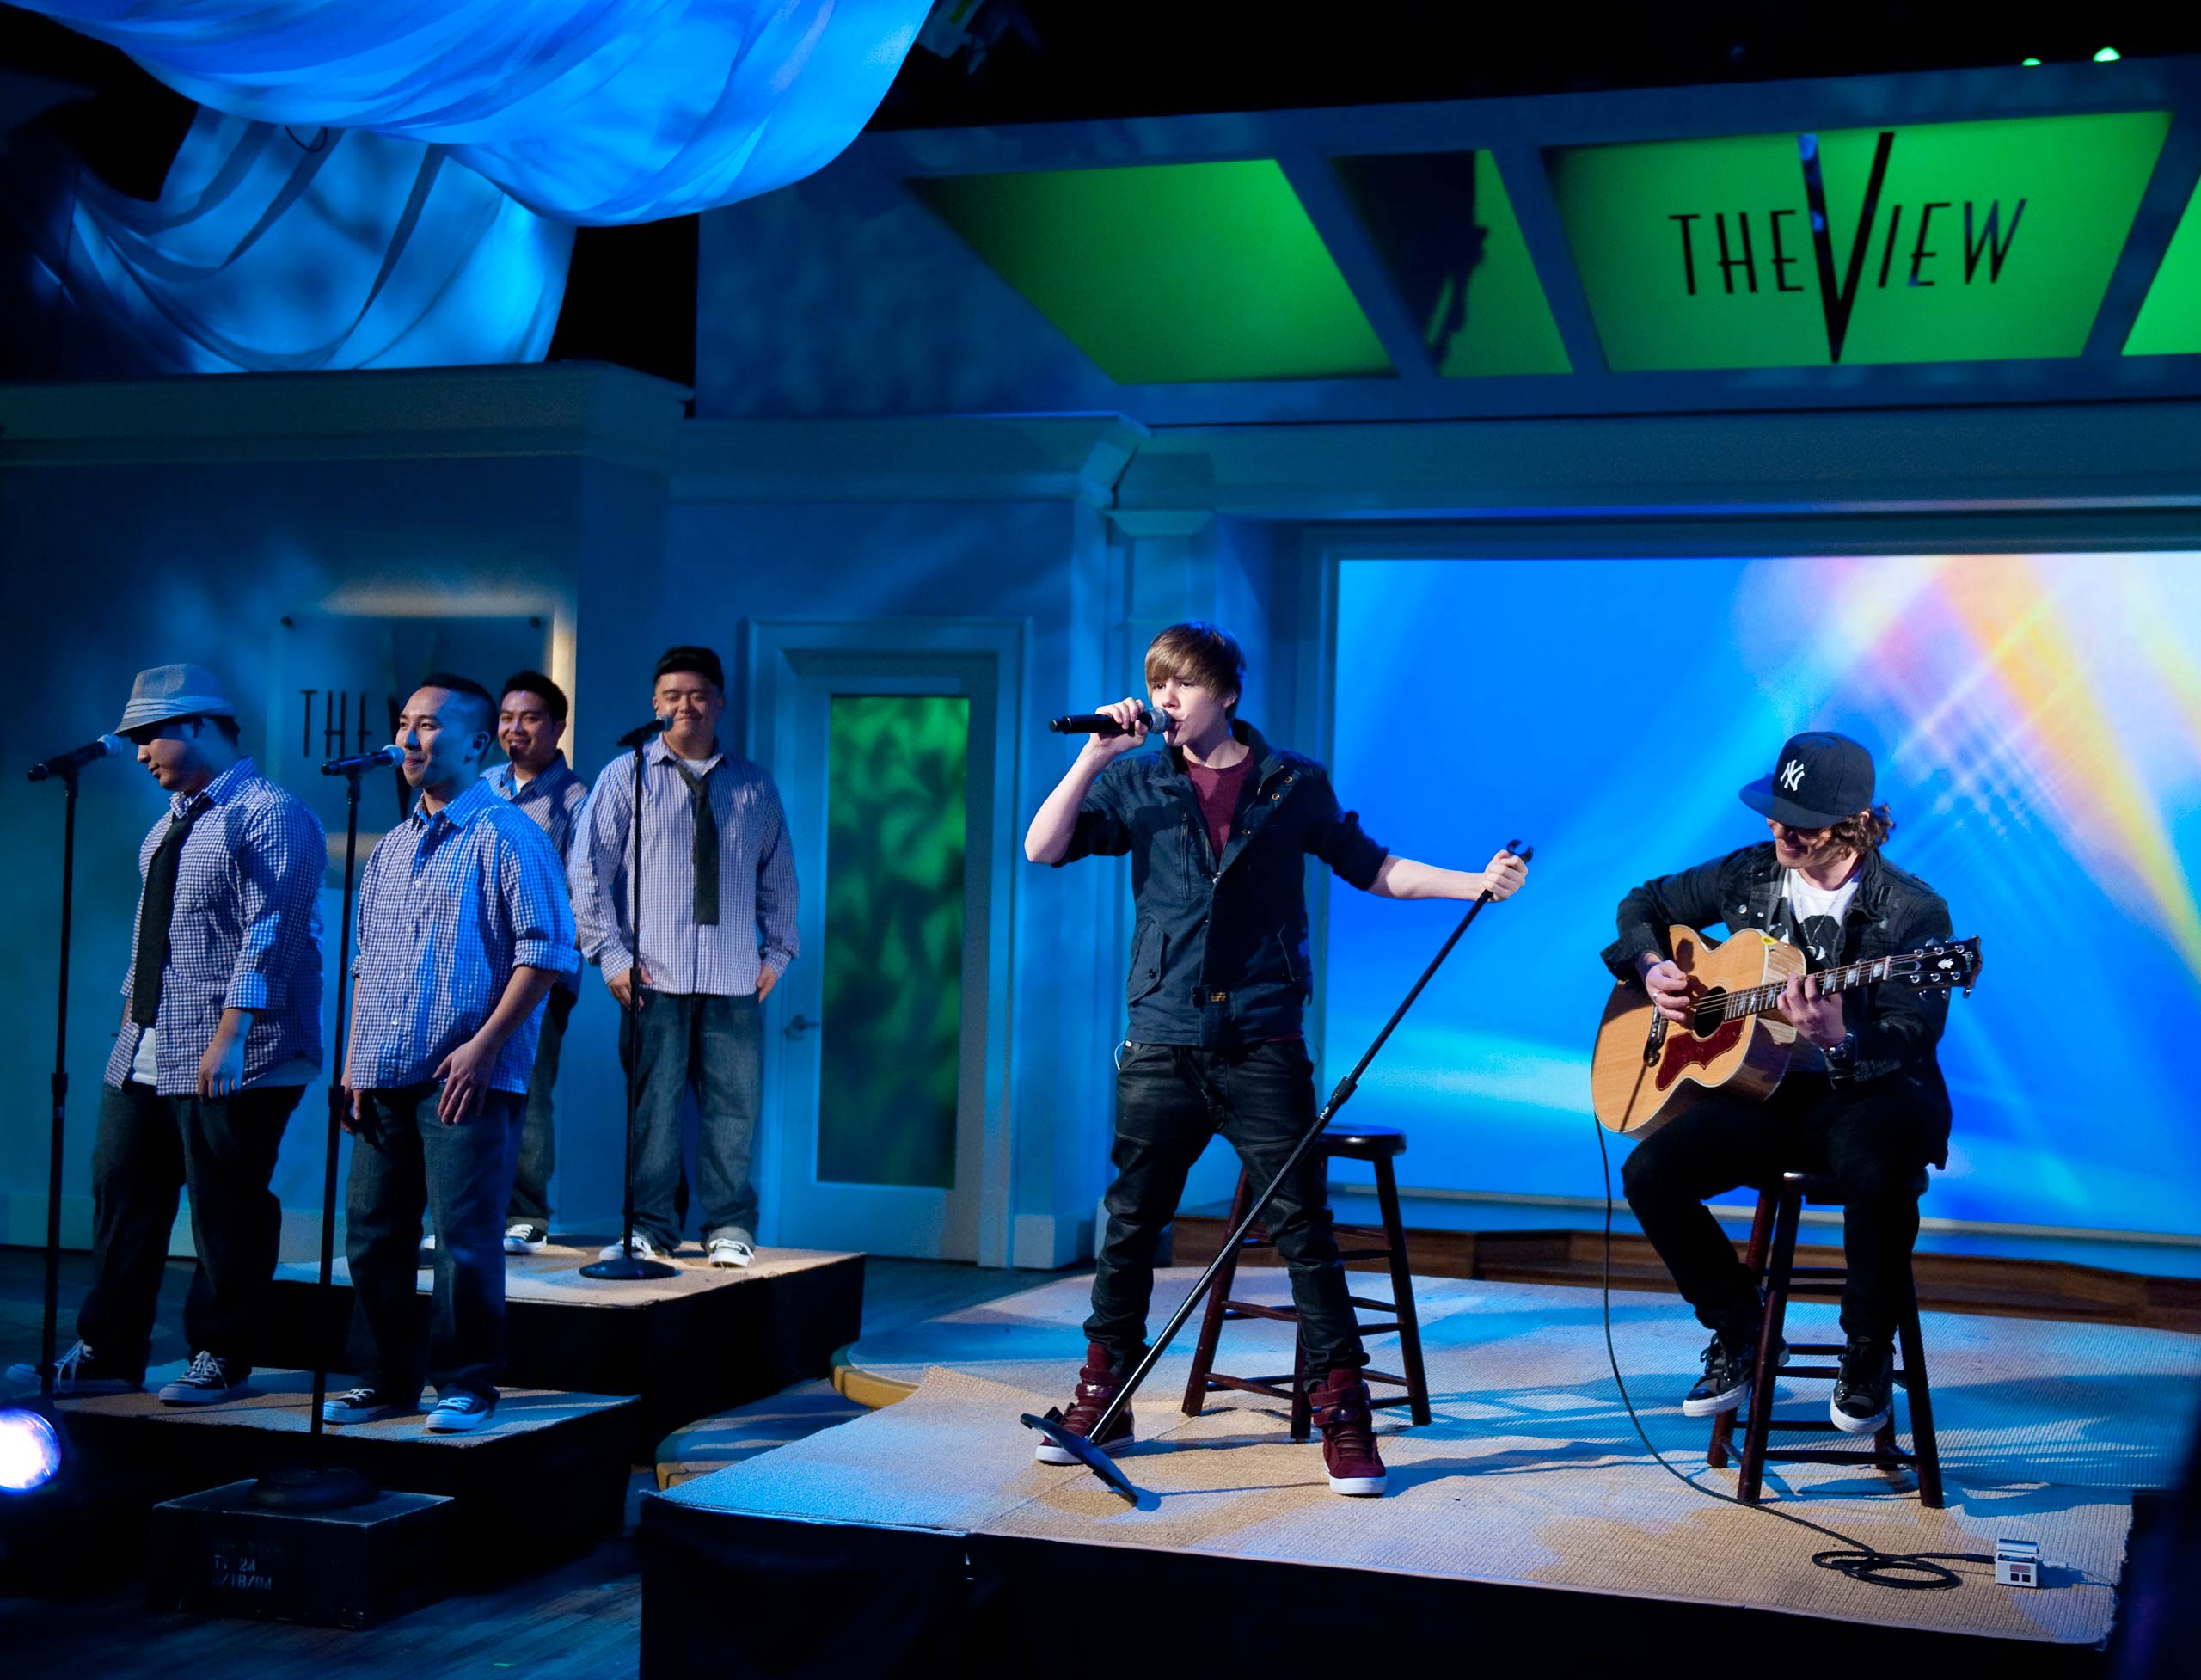 Justin Bieber performs on The View in 2010.